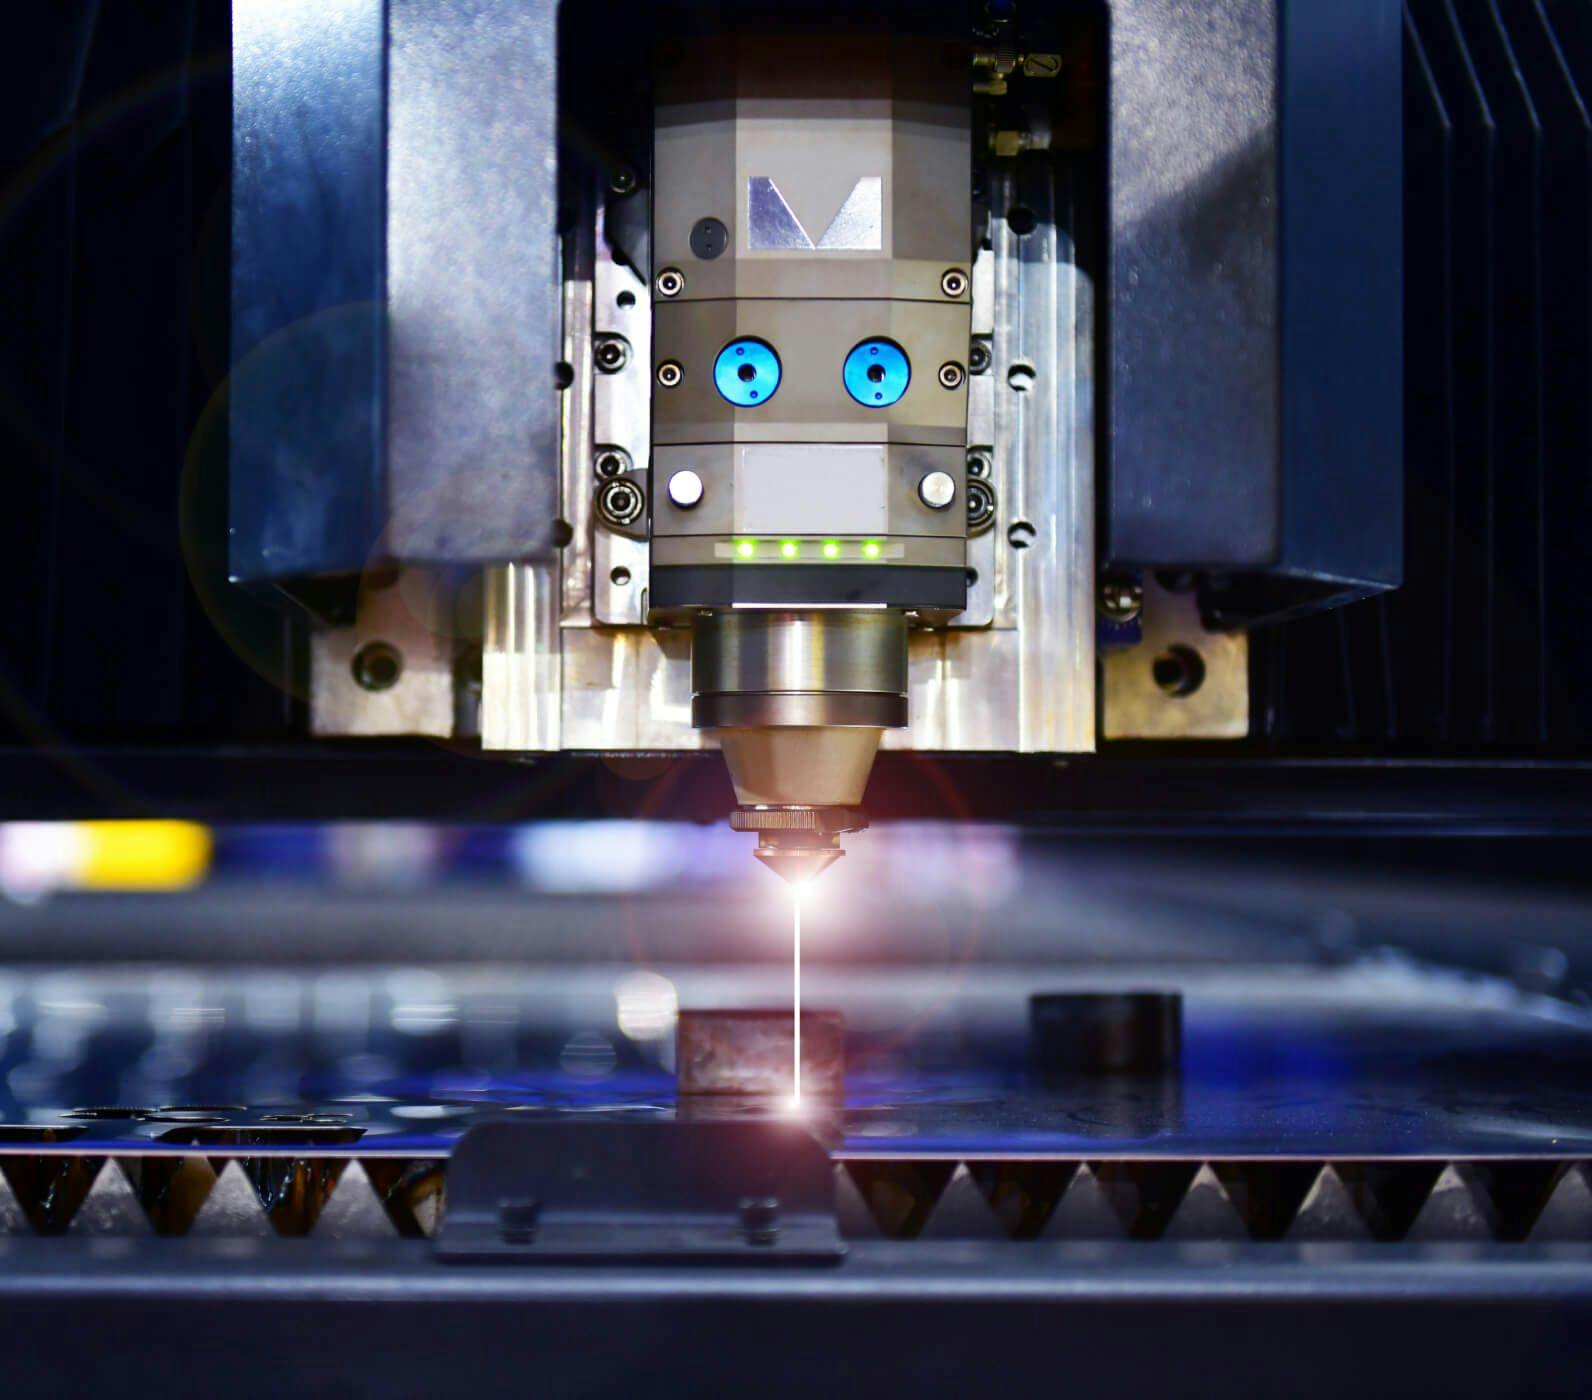 Safe, secure and reliable laser technology